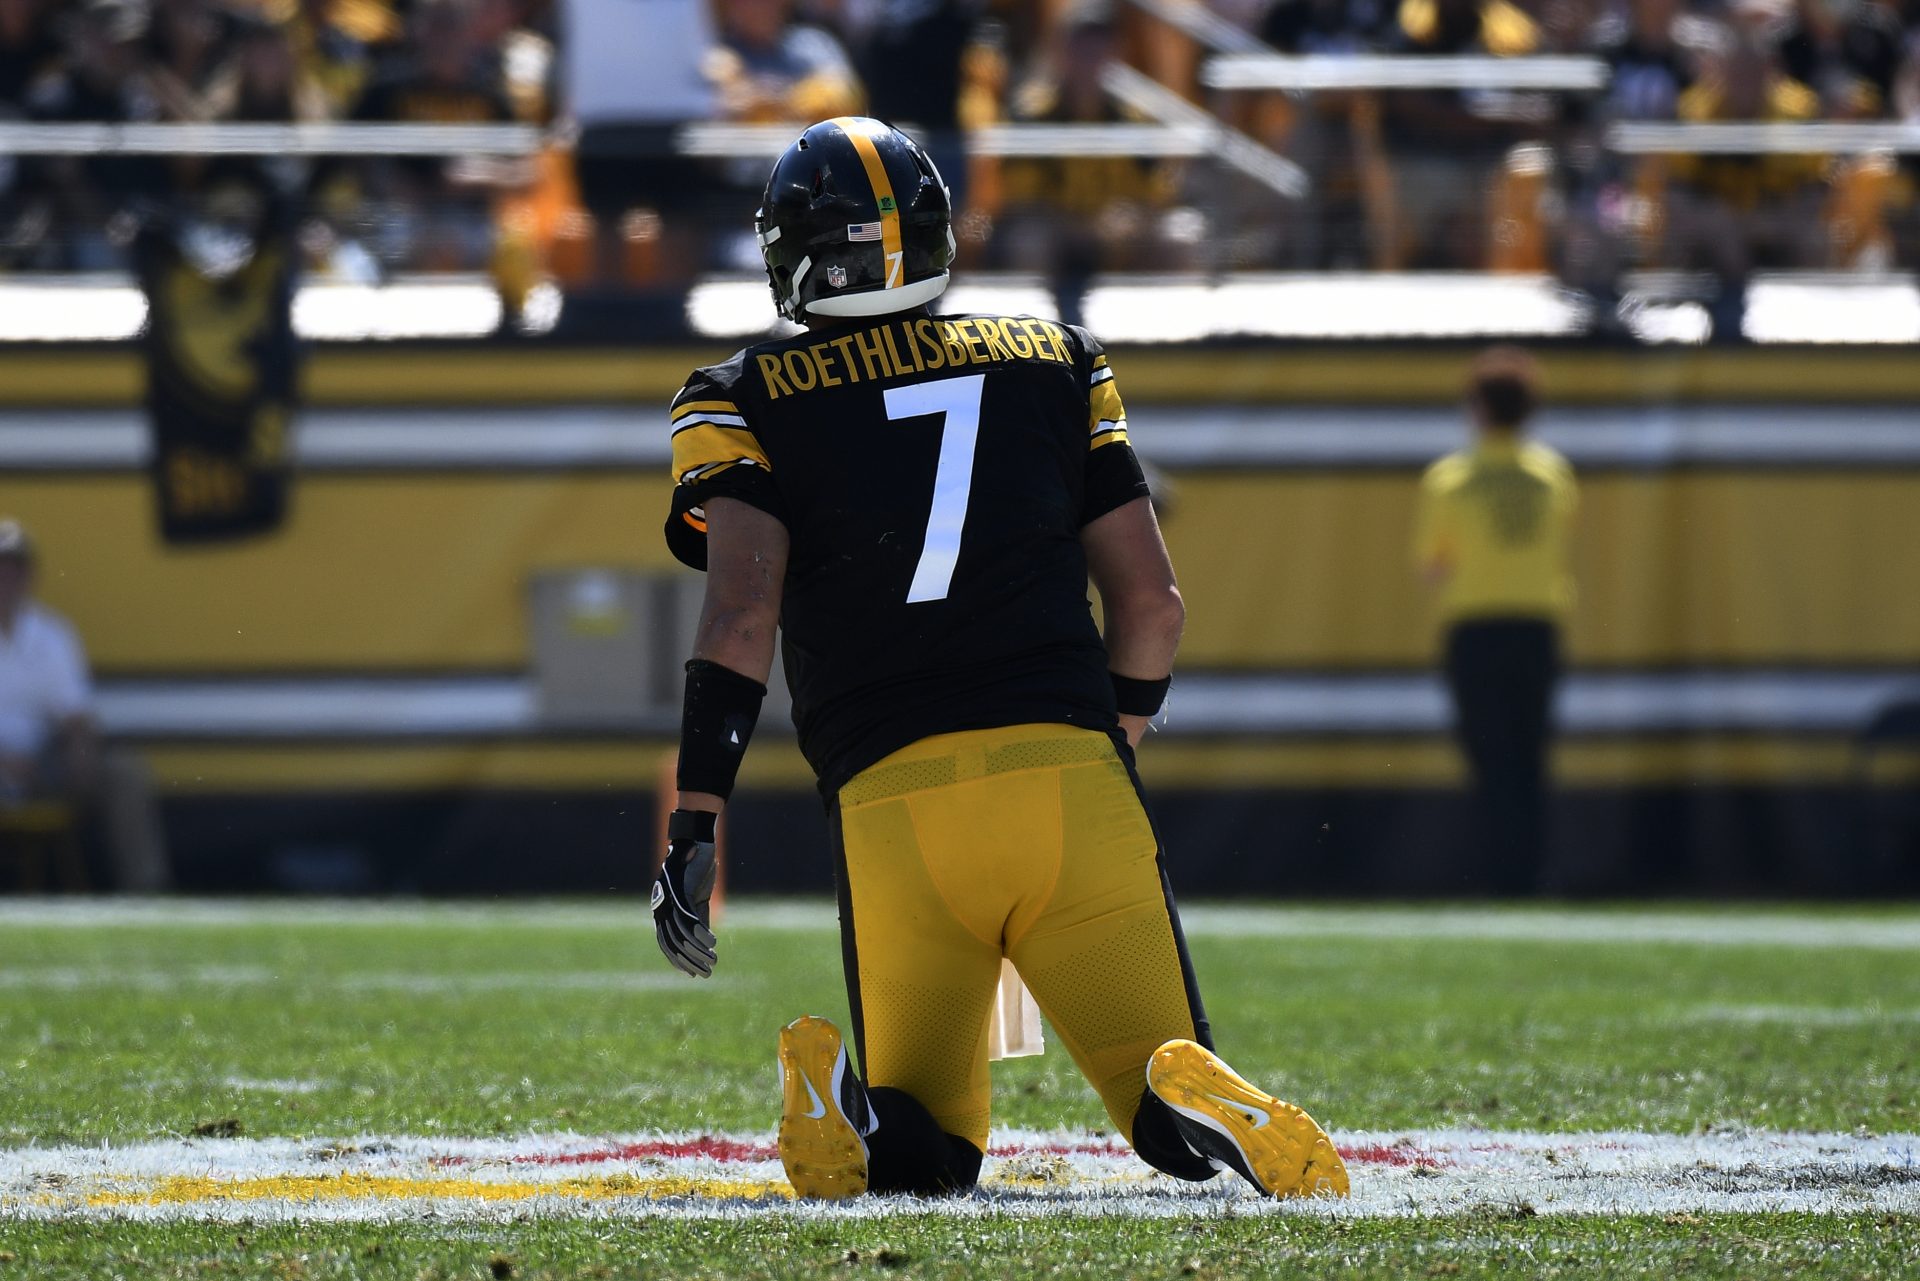 Pittsburgh Steelers quarterback Ben Roethlisberger (7) gets up slowly after being sacked during the first half of an NFL football game against the Las Vegas Raiders in Pittsburgh, Sunday, Sept. 19, 2021.